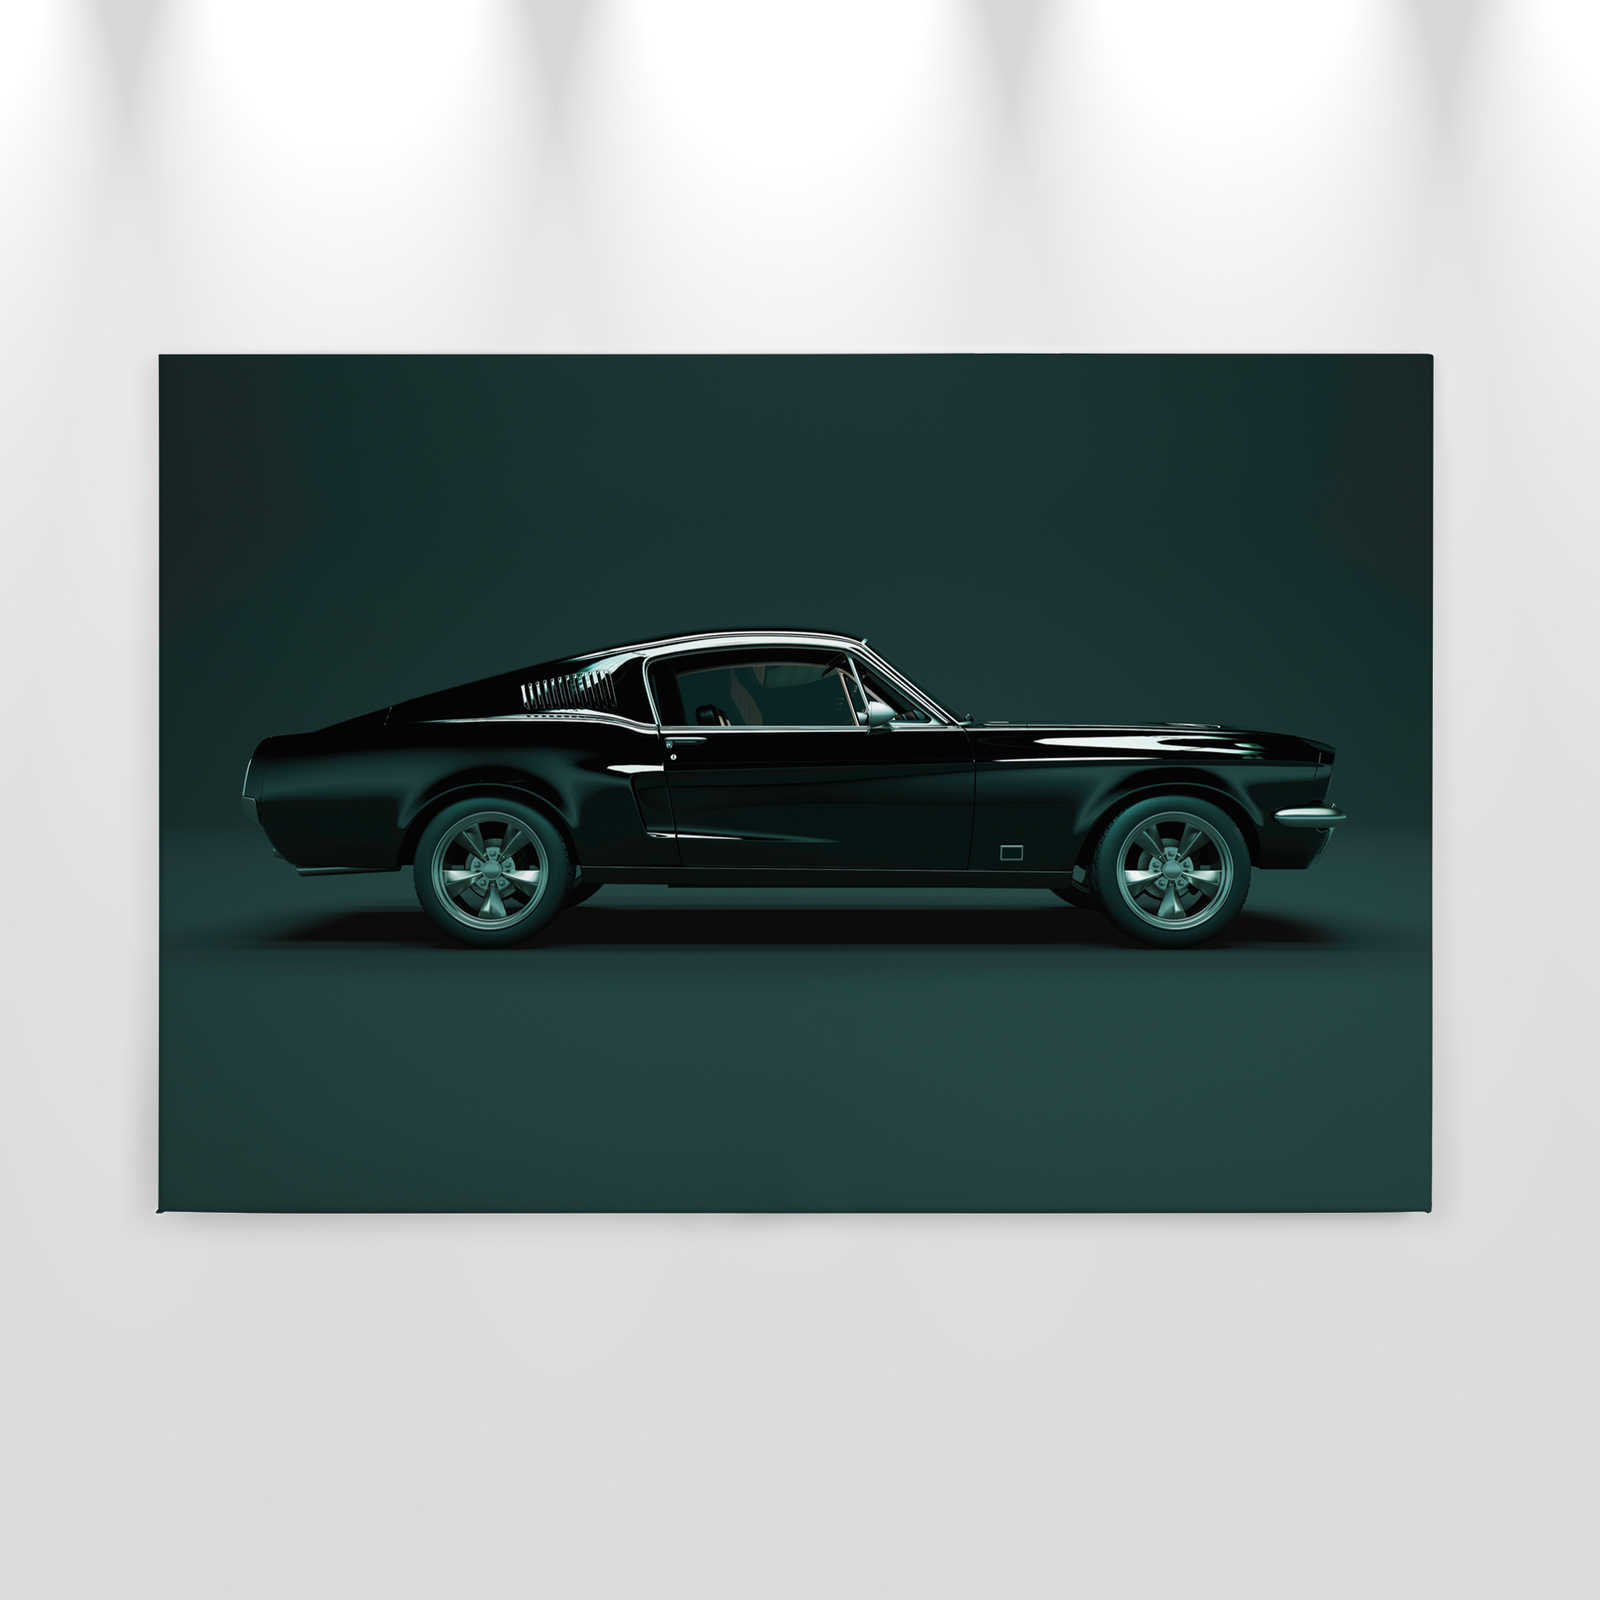             Mustang 1 - Canvas painting, side view Mustang, vintage - 0.90 m x 0.60 m
        